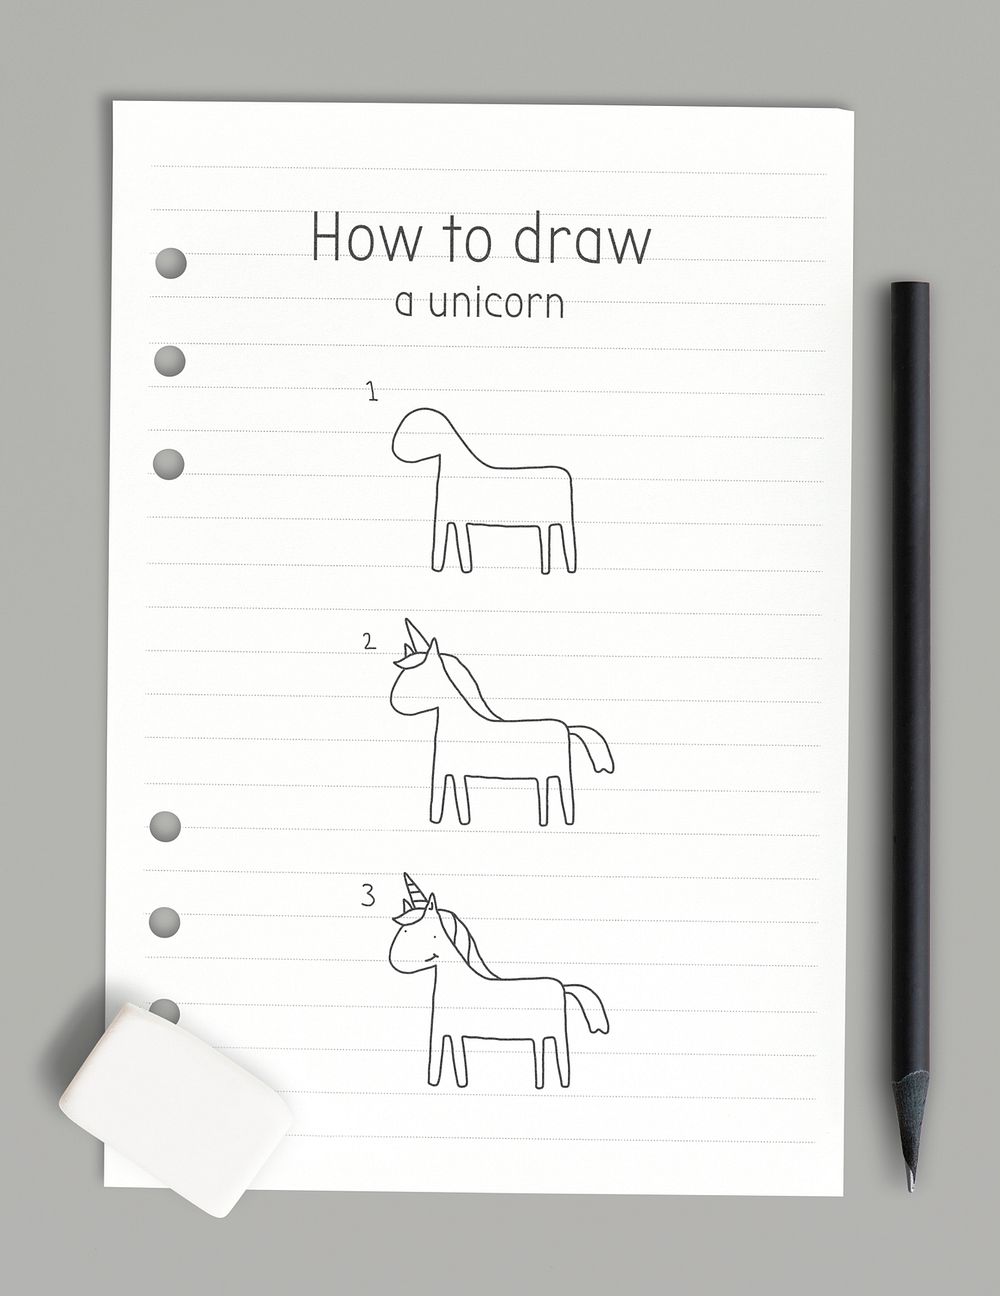 How to draw a unicorn doodle tutorial on a white paper mockup